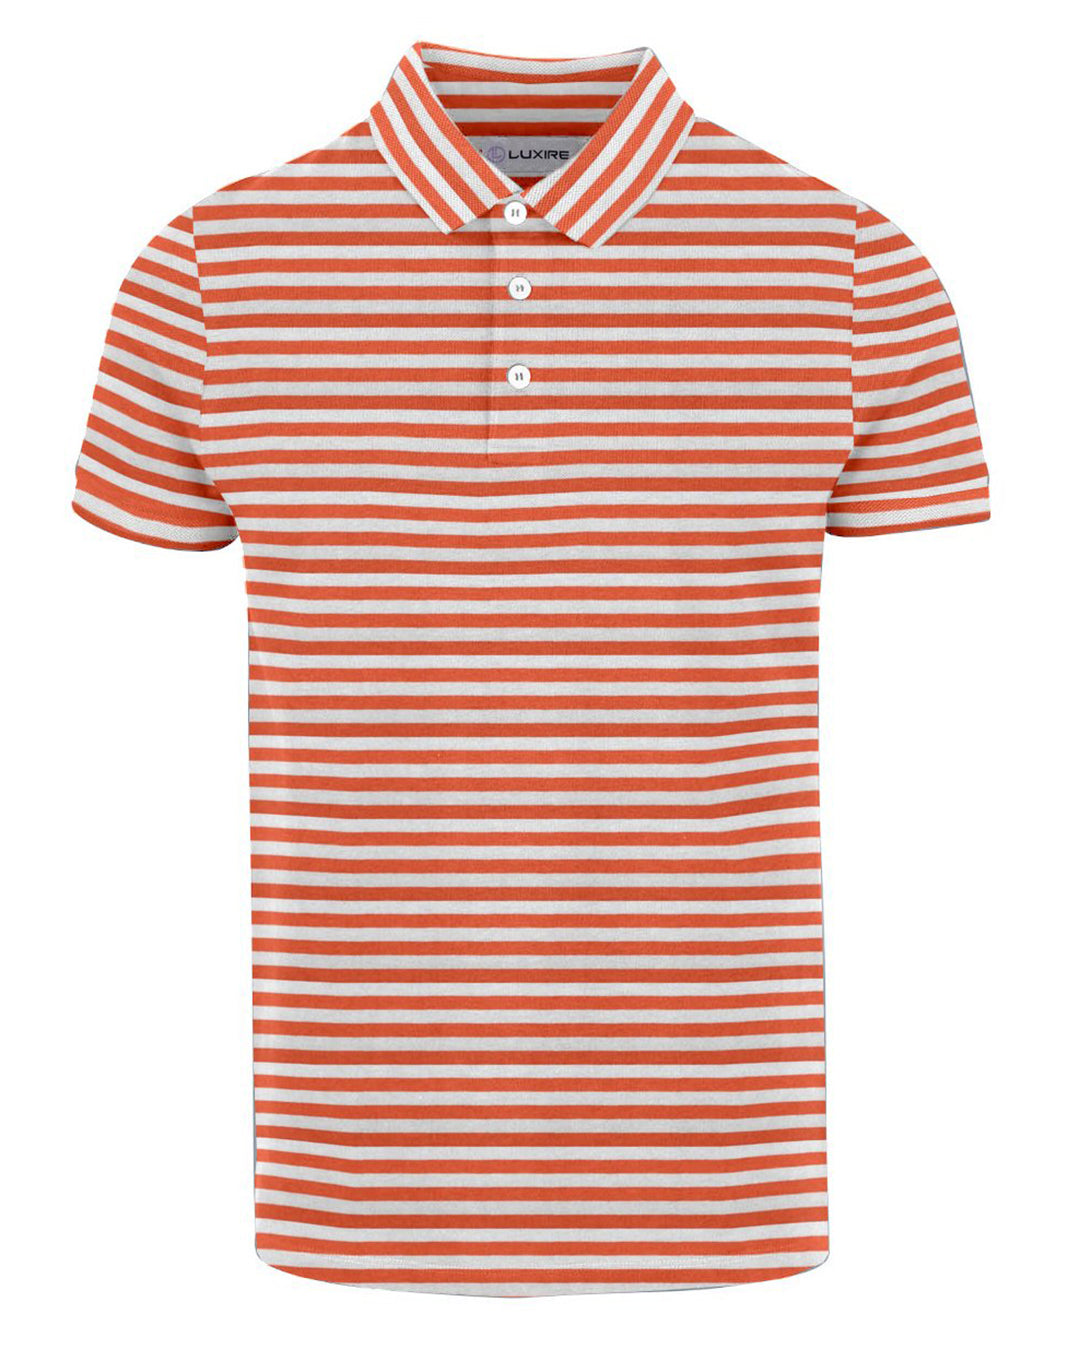 Front of the custom oxford polo shirt for men by Luxire in orange and white stripes